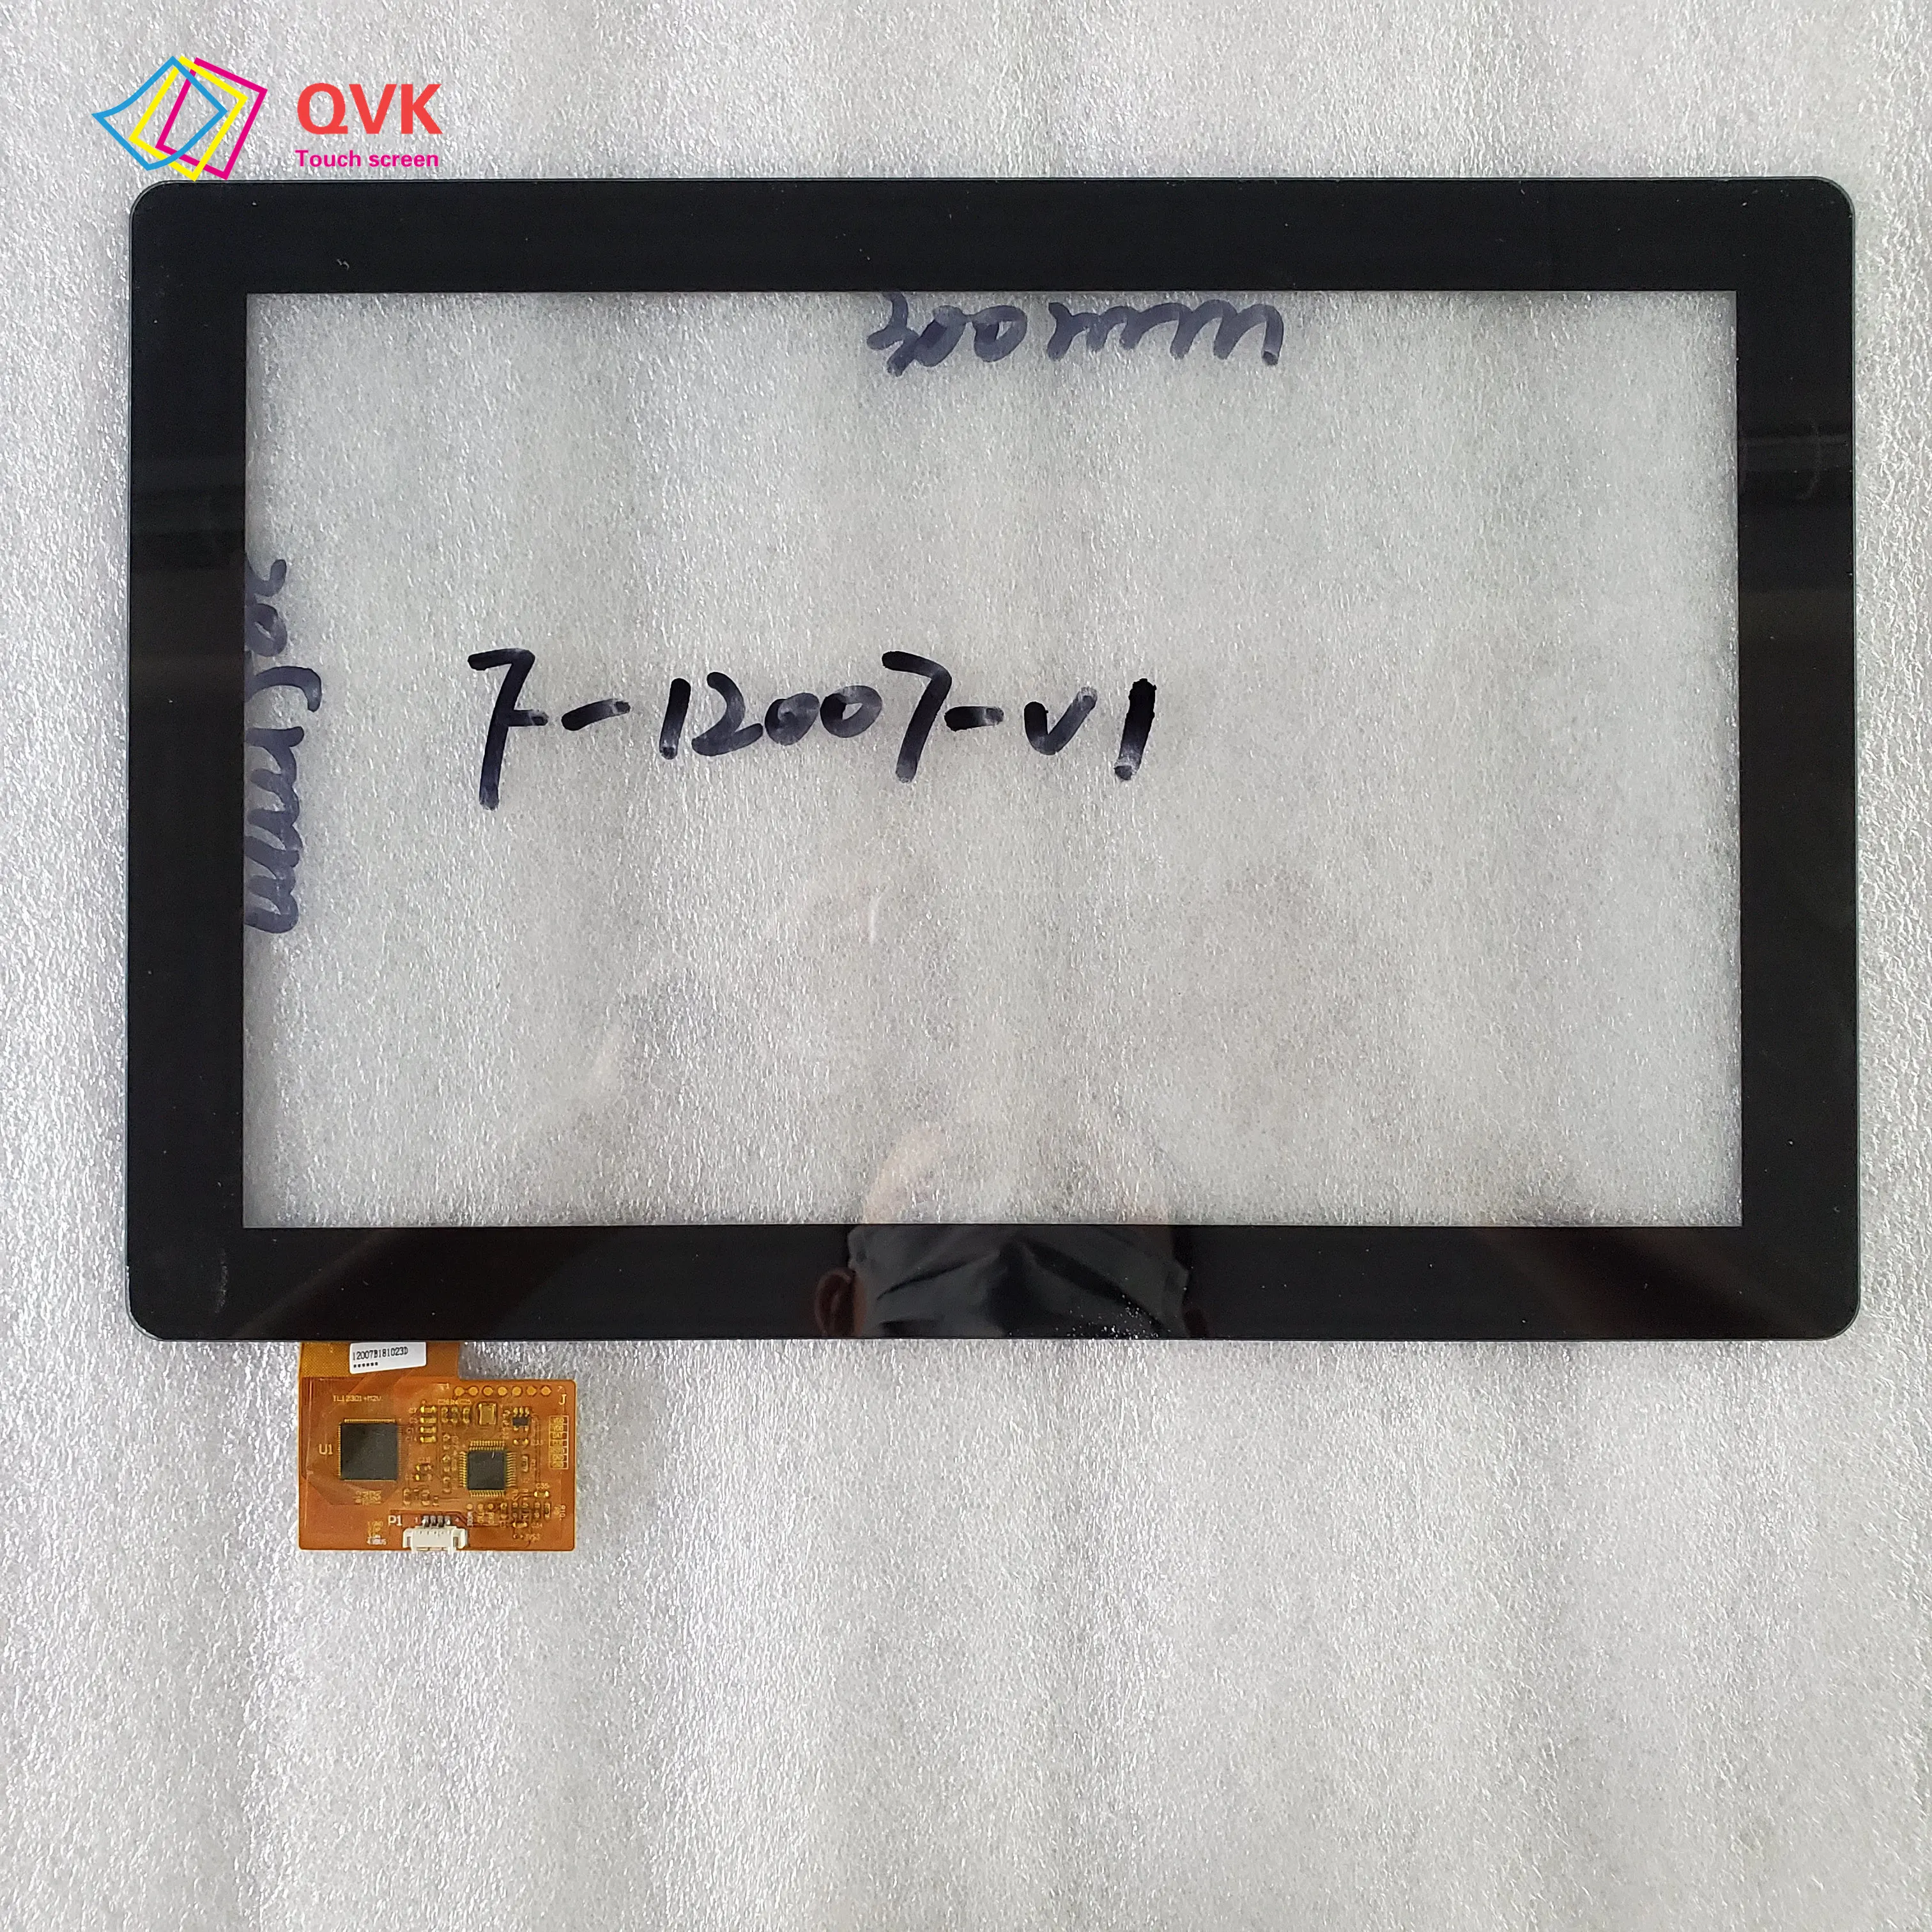 Black New touch screen P/N F-12007-V1 Capacitive touch screen panel repair and replacement parts free shipping